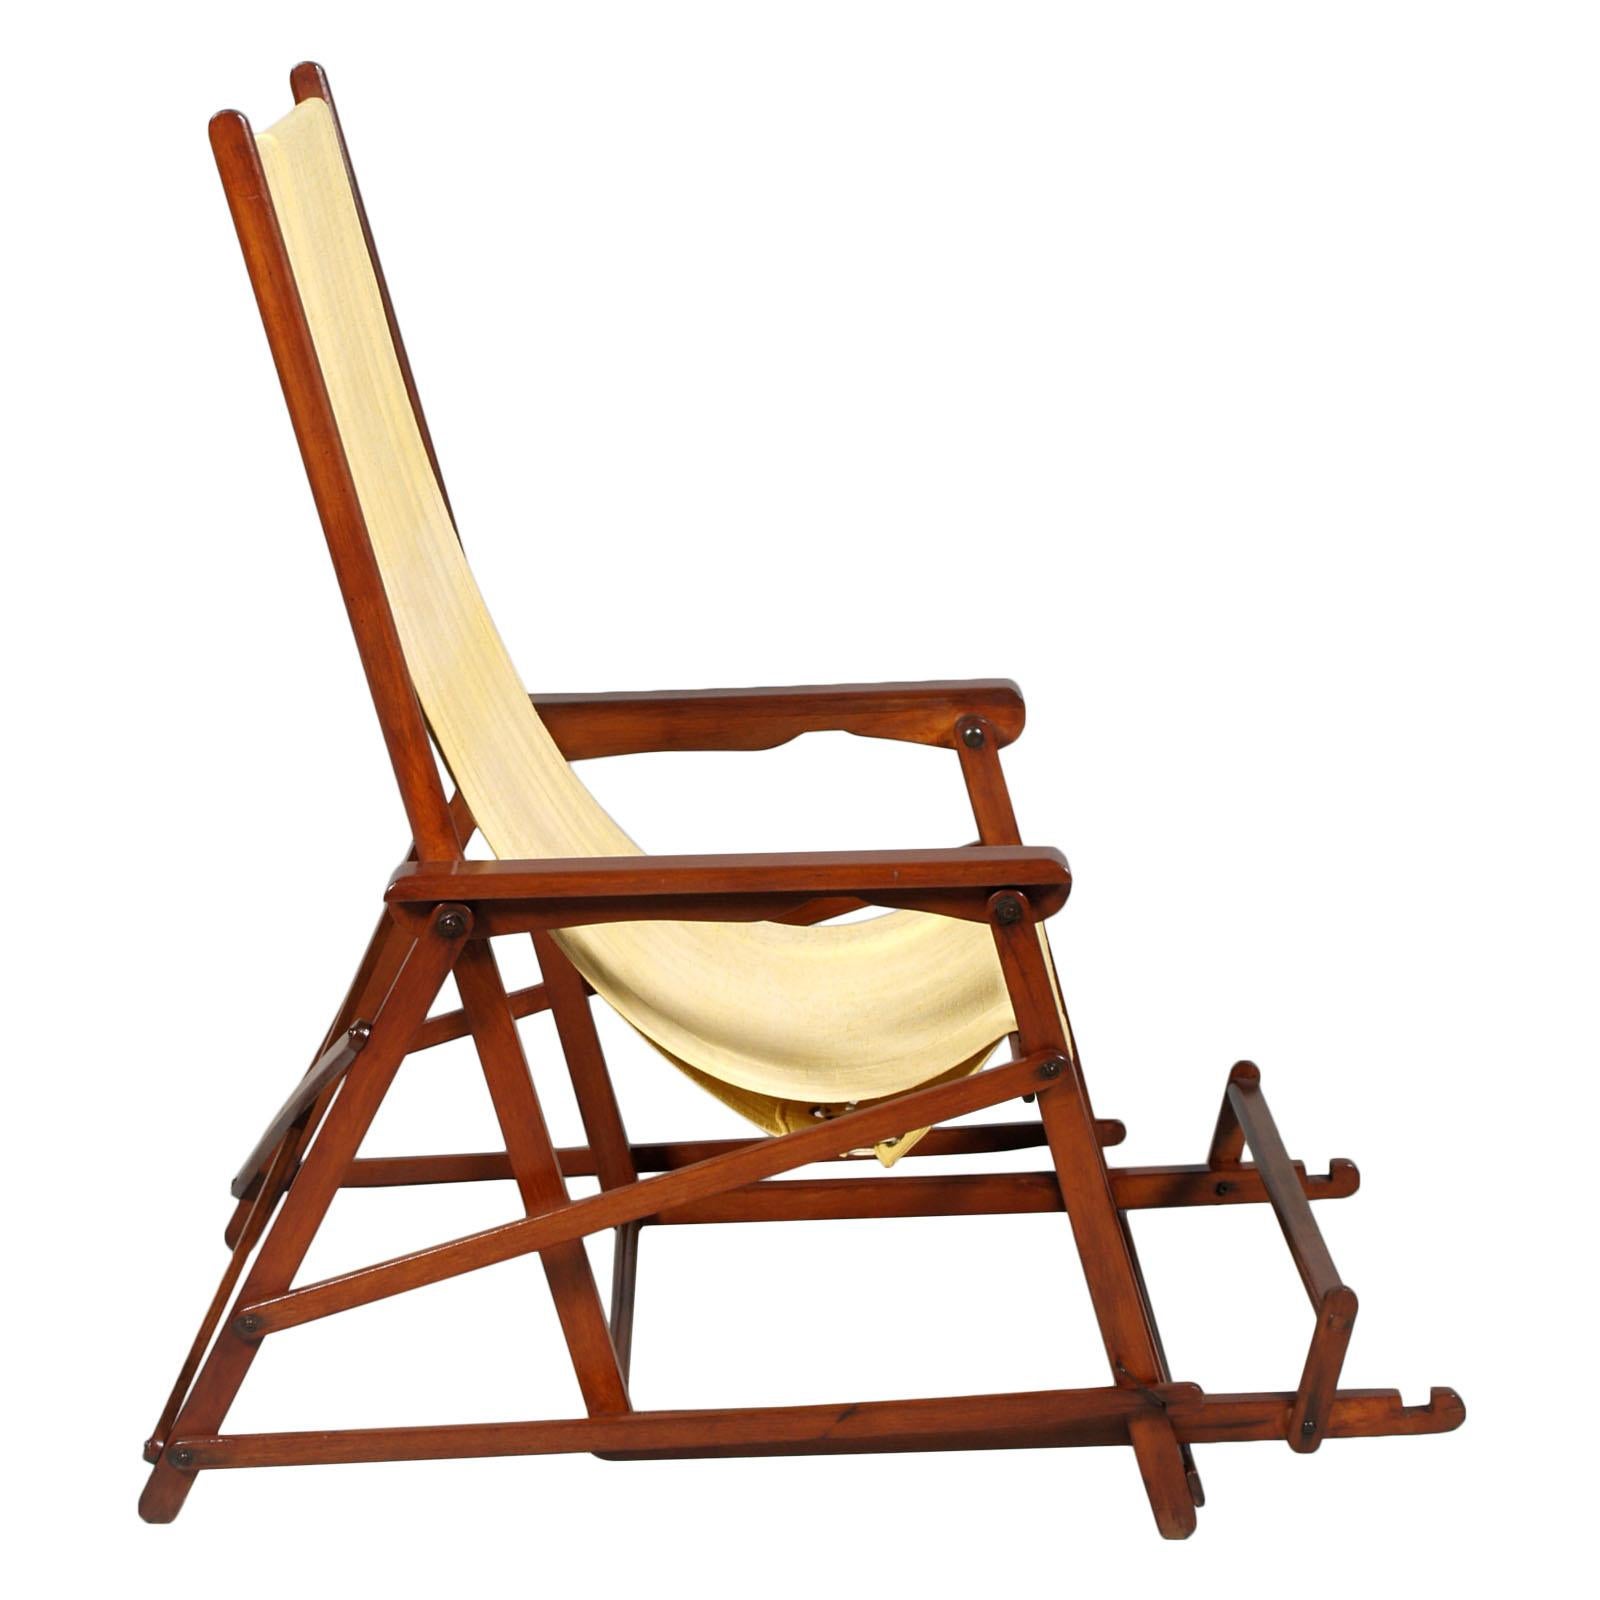 Mid-Century Modern Midcentury French Folding Canvas Long Chair, Clairitex Chaise Long de Paquebot